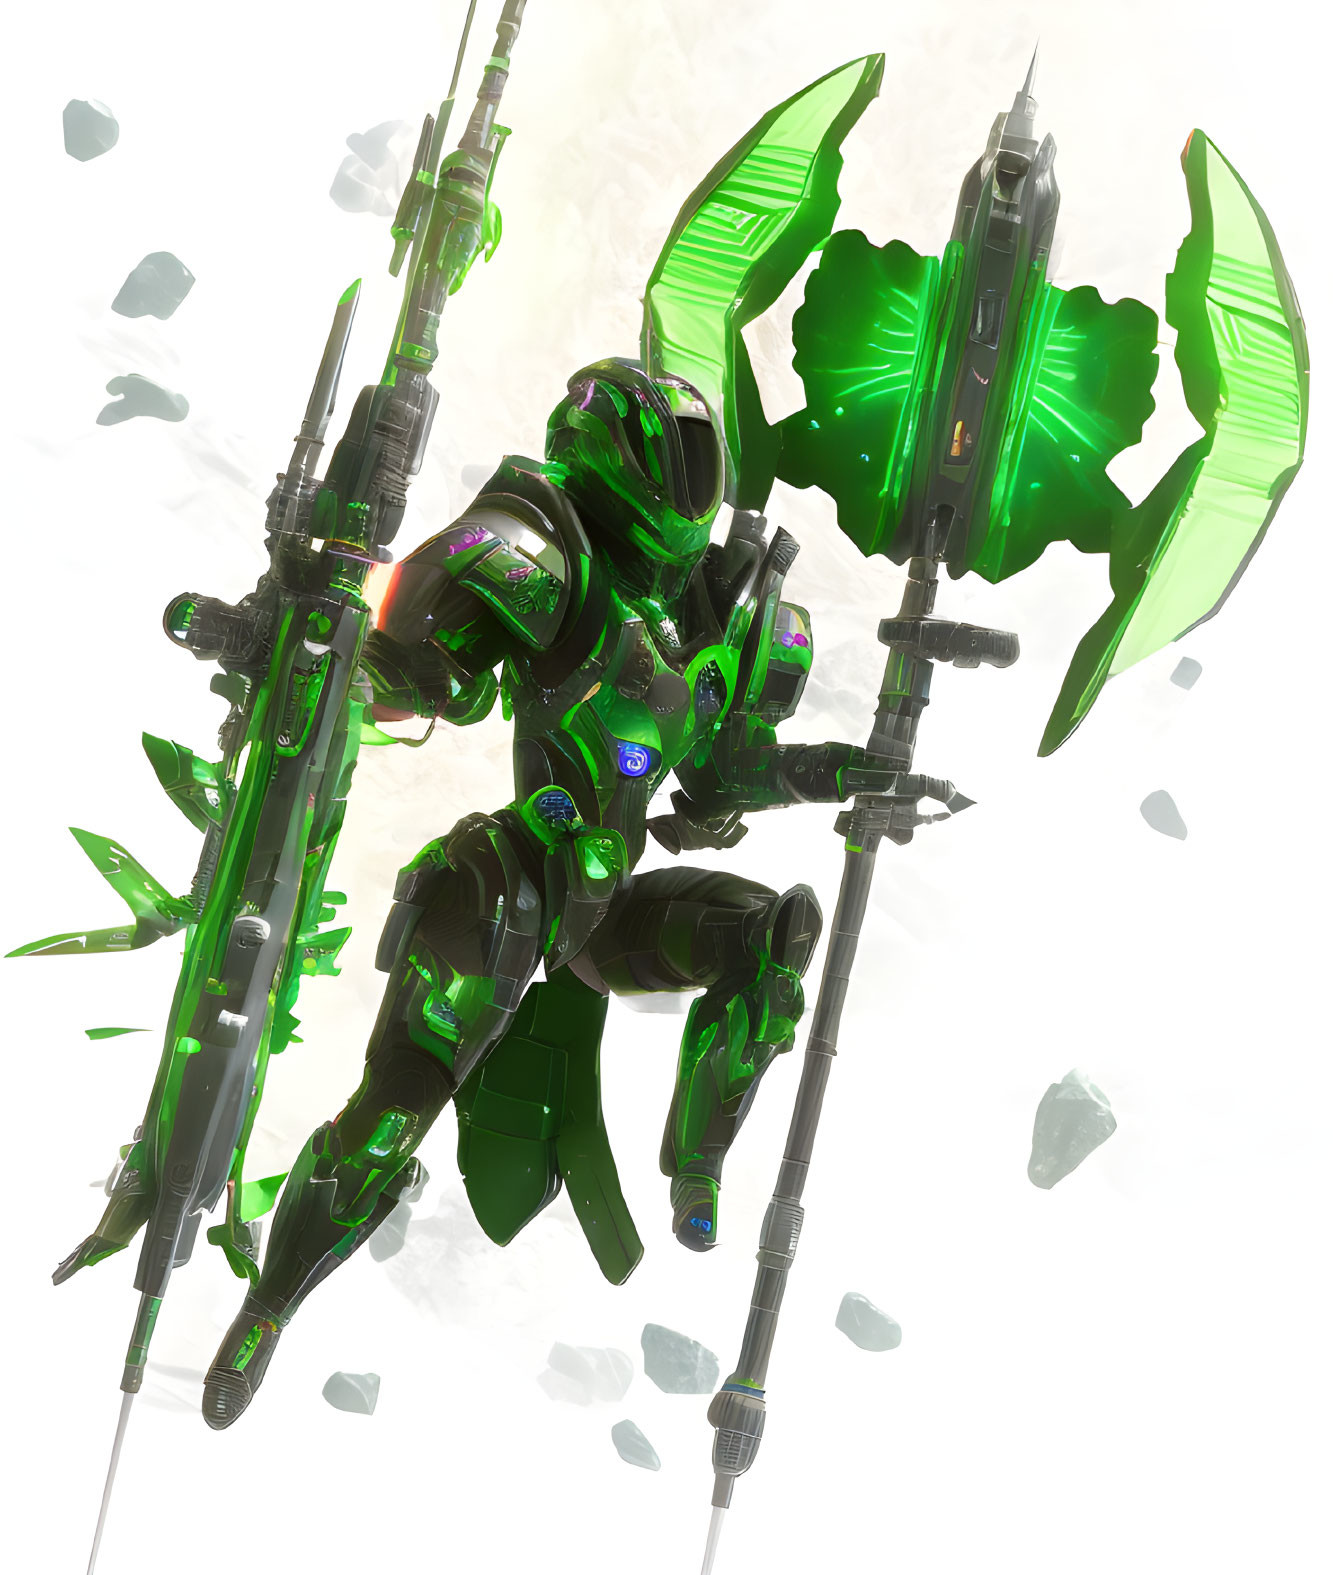 Green Armored Character with Wings and Lance in Action Scene